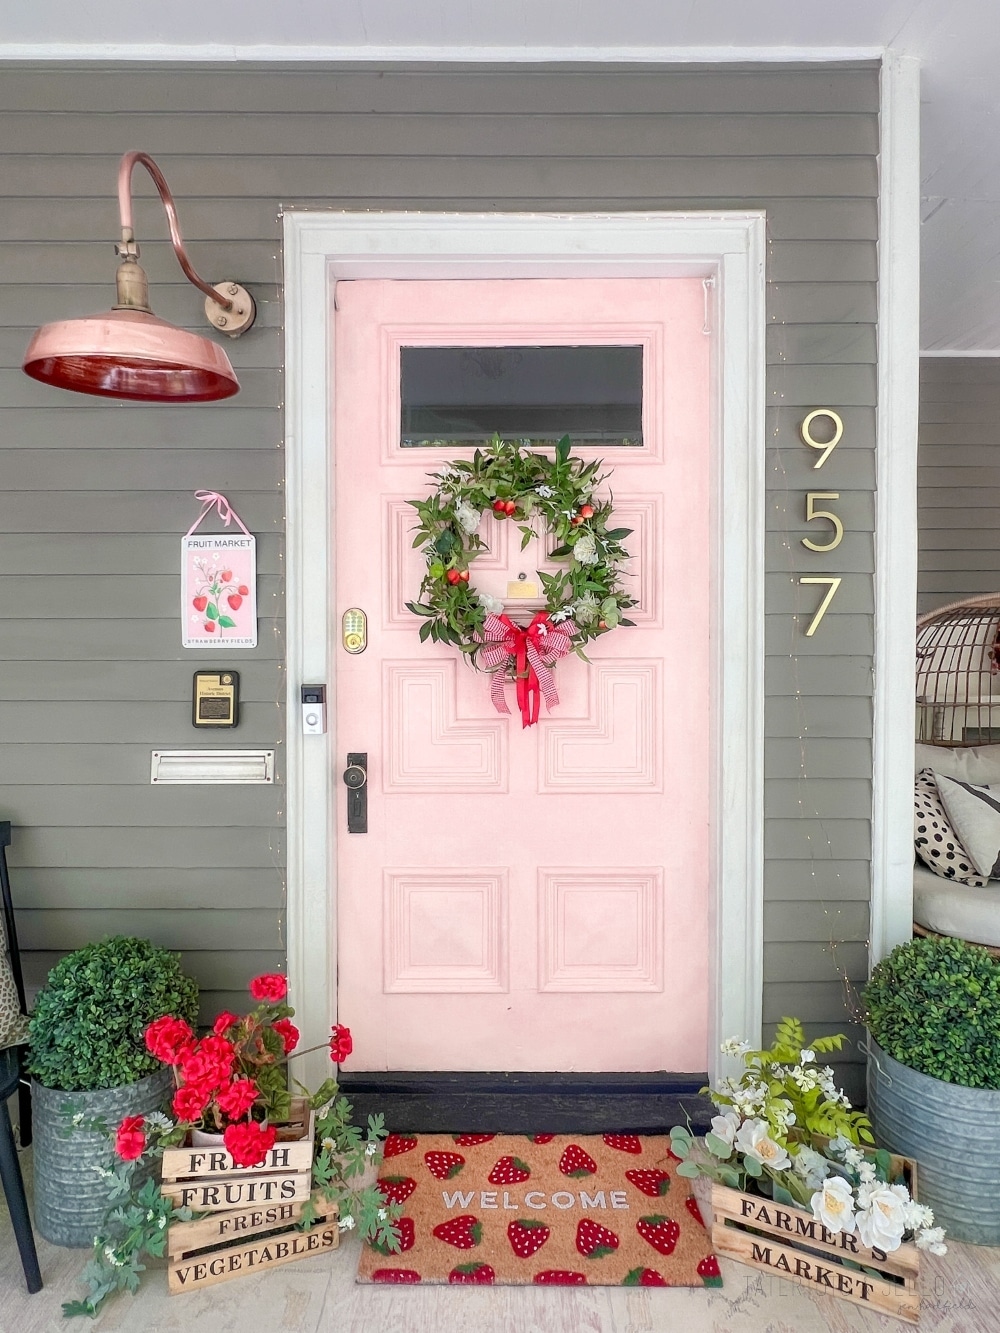 DIY Summer Strawberry Wreath. Create a charming summer strawberry-themed wreath by combining faux strawberries and flowers, lush greenery, and a red bow for a delightful way to decorate your front door.